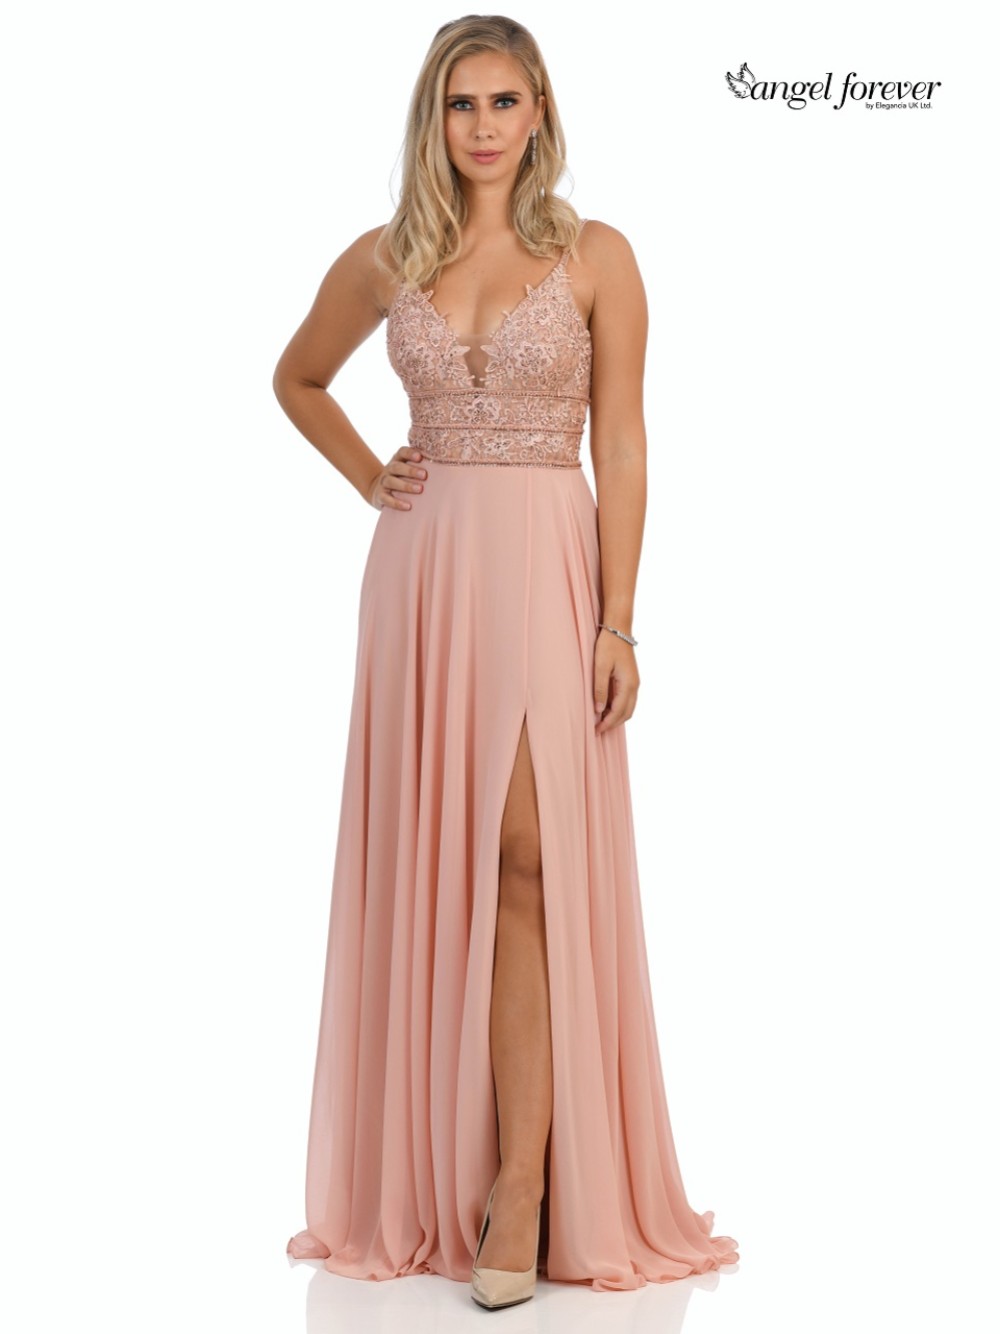 Photograph: Angel Forever Beaded Lace A Line Chiffon Prom Dress with Slit (Rose Pink)